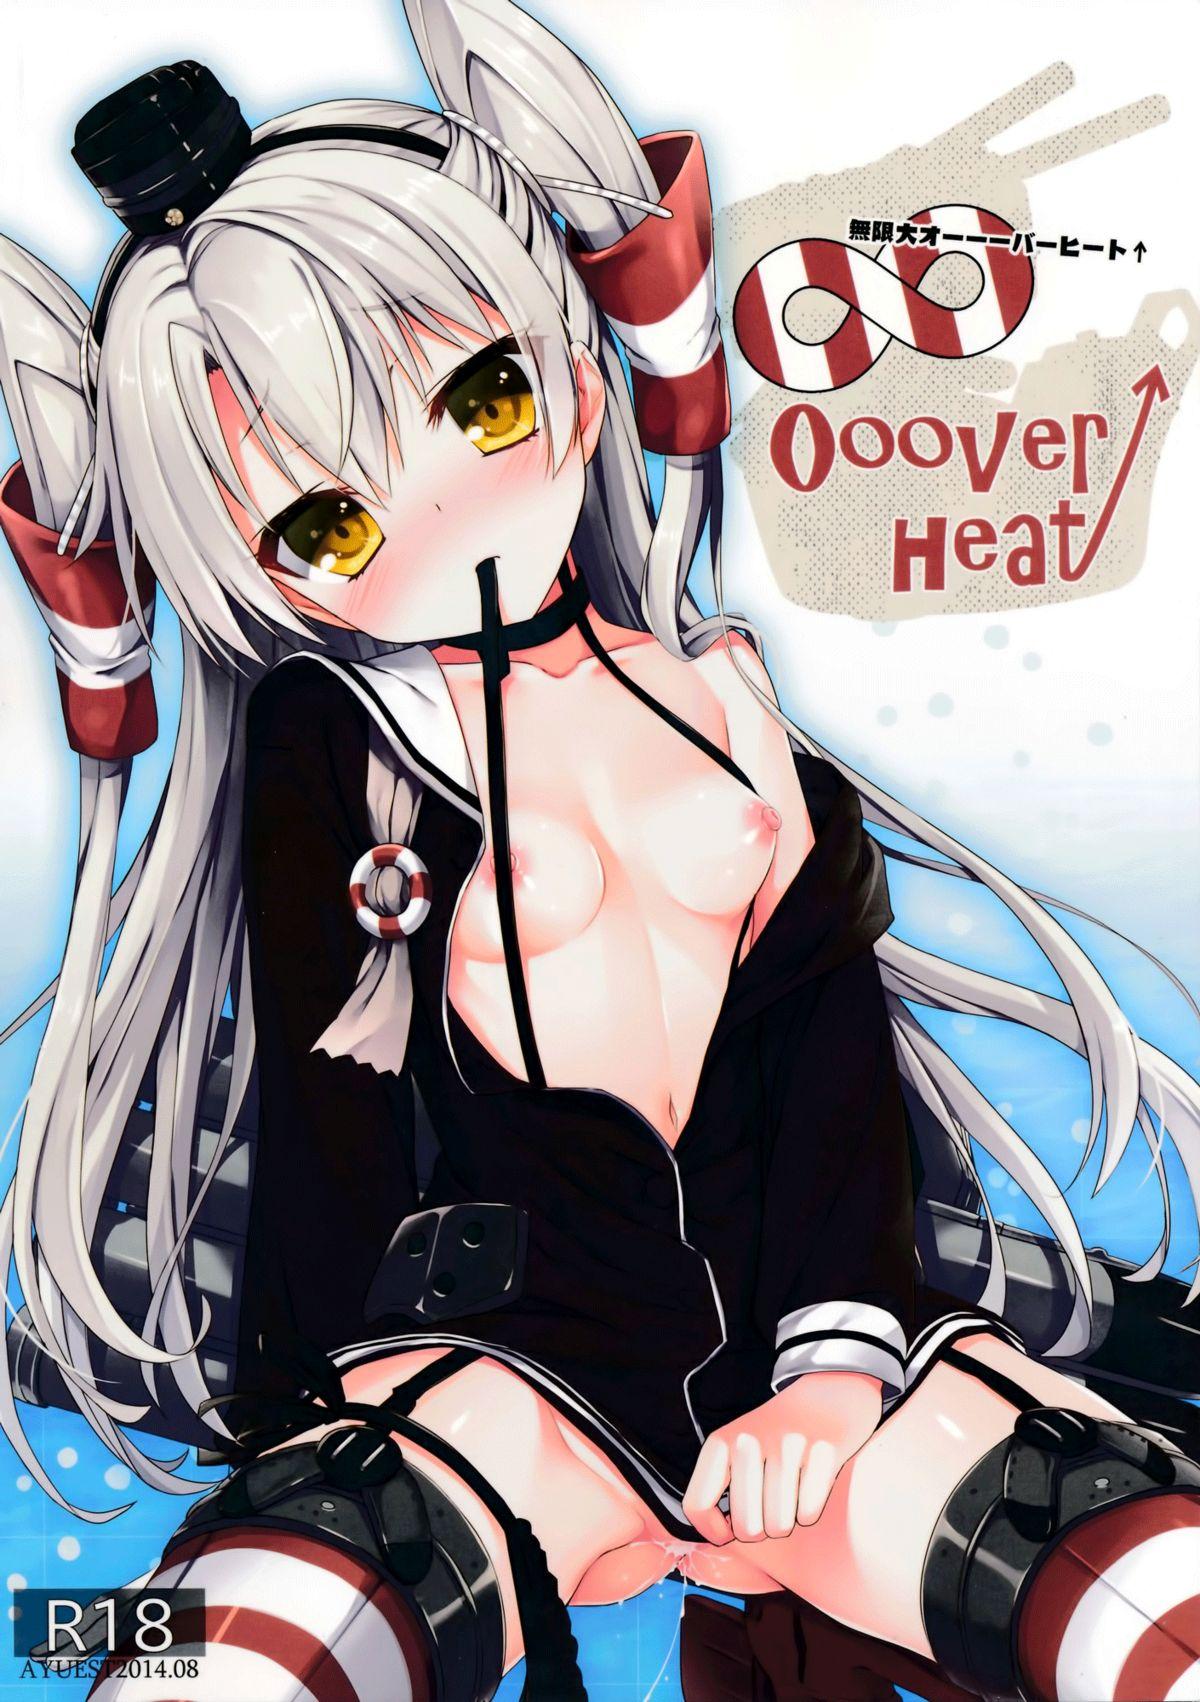 Teenage Sex ∞Oooverheat↑ - Kantai collection Guy - Picture 1